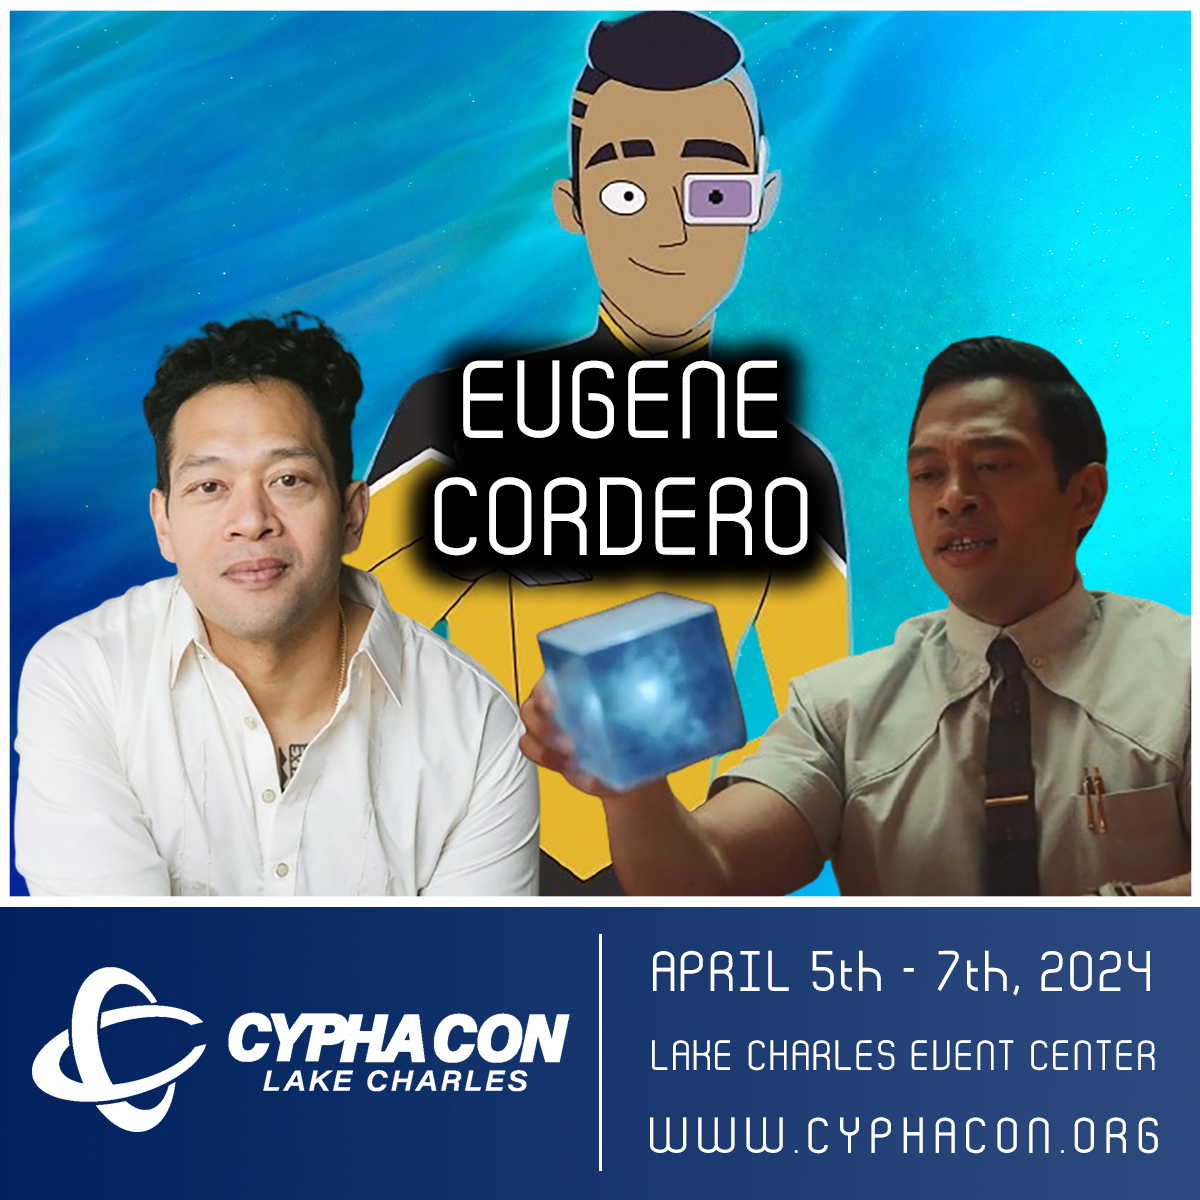 CYPHACON is proud to announce our next Sci-Fi guest, Eugene Cordero!

Eugene will be joining us April 5th - 7th, 2024 at the @LCCivicCenter in Lake Charles Louisiana!

For complete information visit our website, tickets on sale now! cyphacon.org/speakers/eugen…